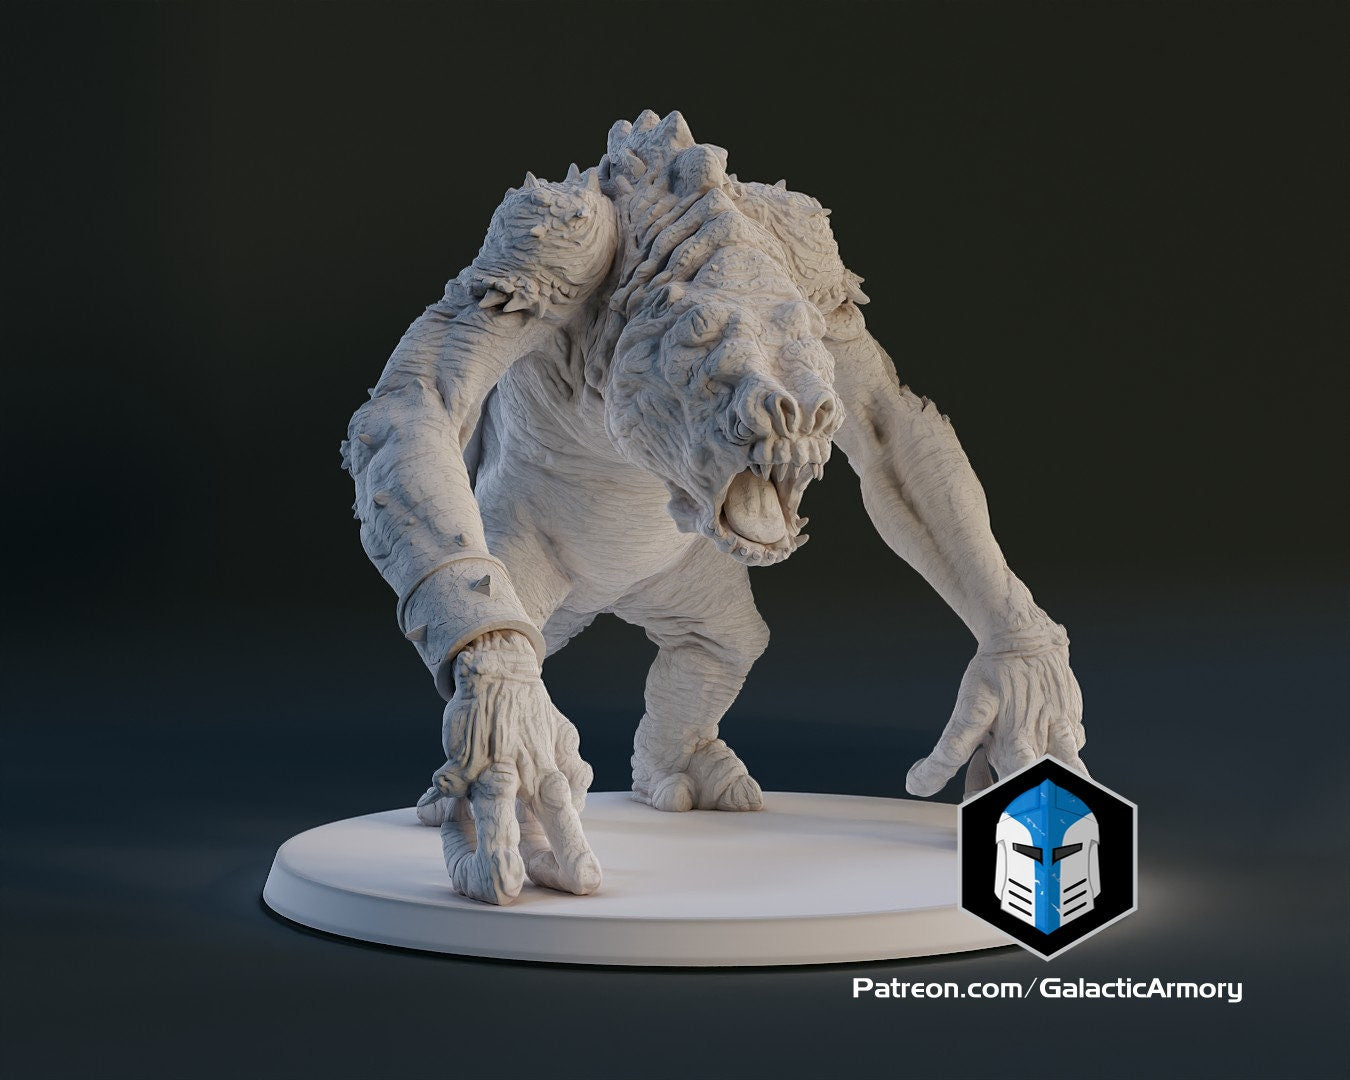 1:48 Scale Rancor (10 poses) - (Fan art by Galactic Armoury)